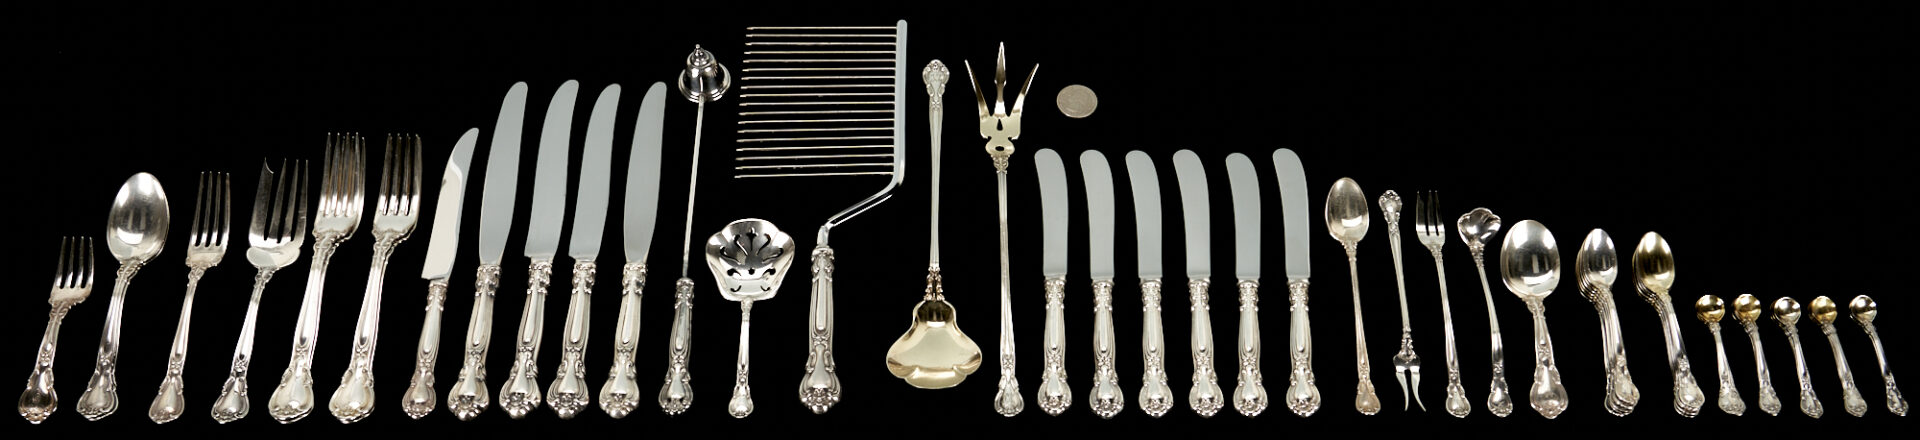 Lot 734: 54 Gorham Chantilly Sterling Silver Flatware Pieces, incl. Misc. Serving Pieces